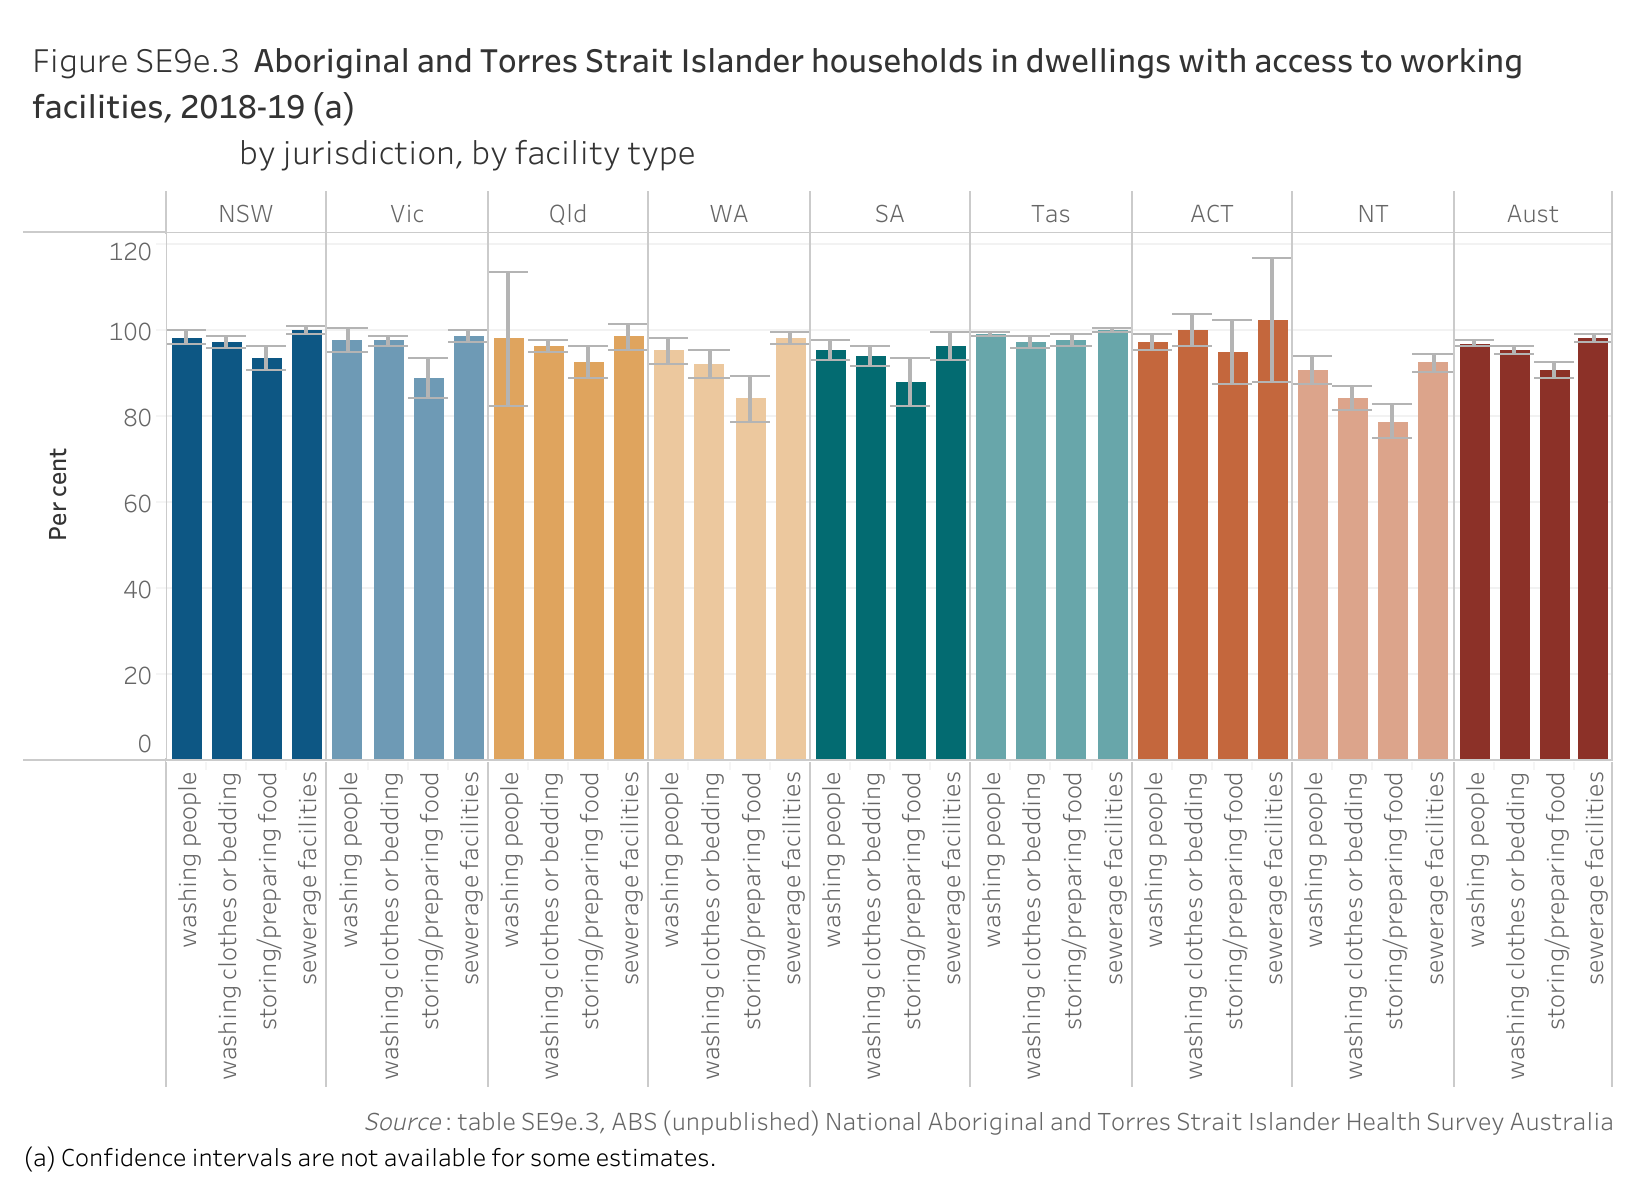 Figure SE9e.3. Bar chart showing the proportion of Aboriginal and Torres Strait Islander households in dwellings with access to working facilities in 2018-19, by jurisdiction and by facility type. Data table of figure SE9e.3 is below.